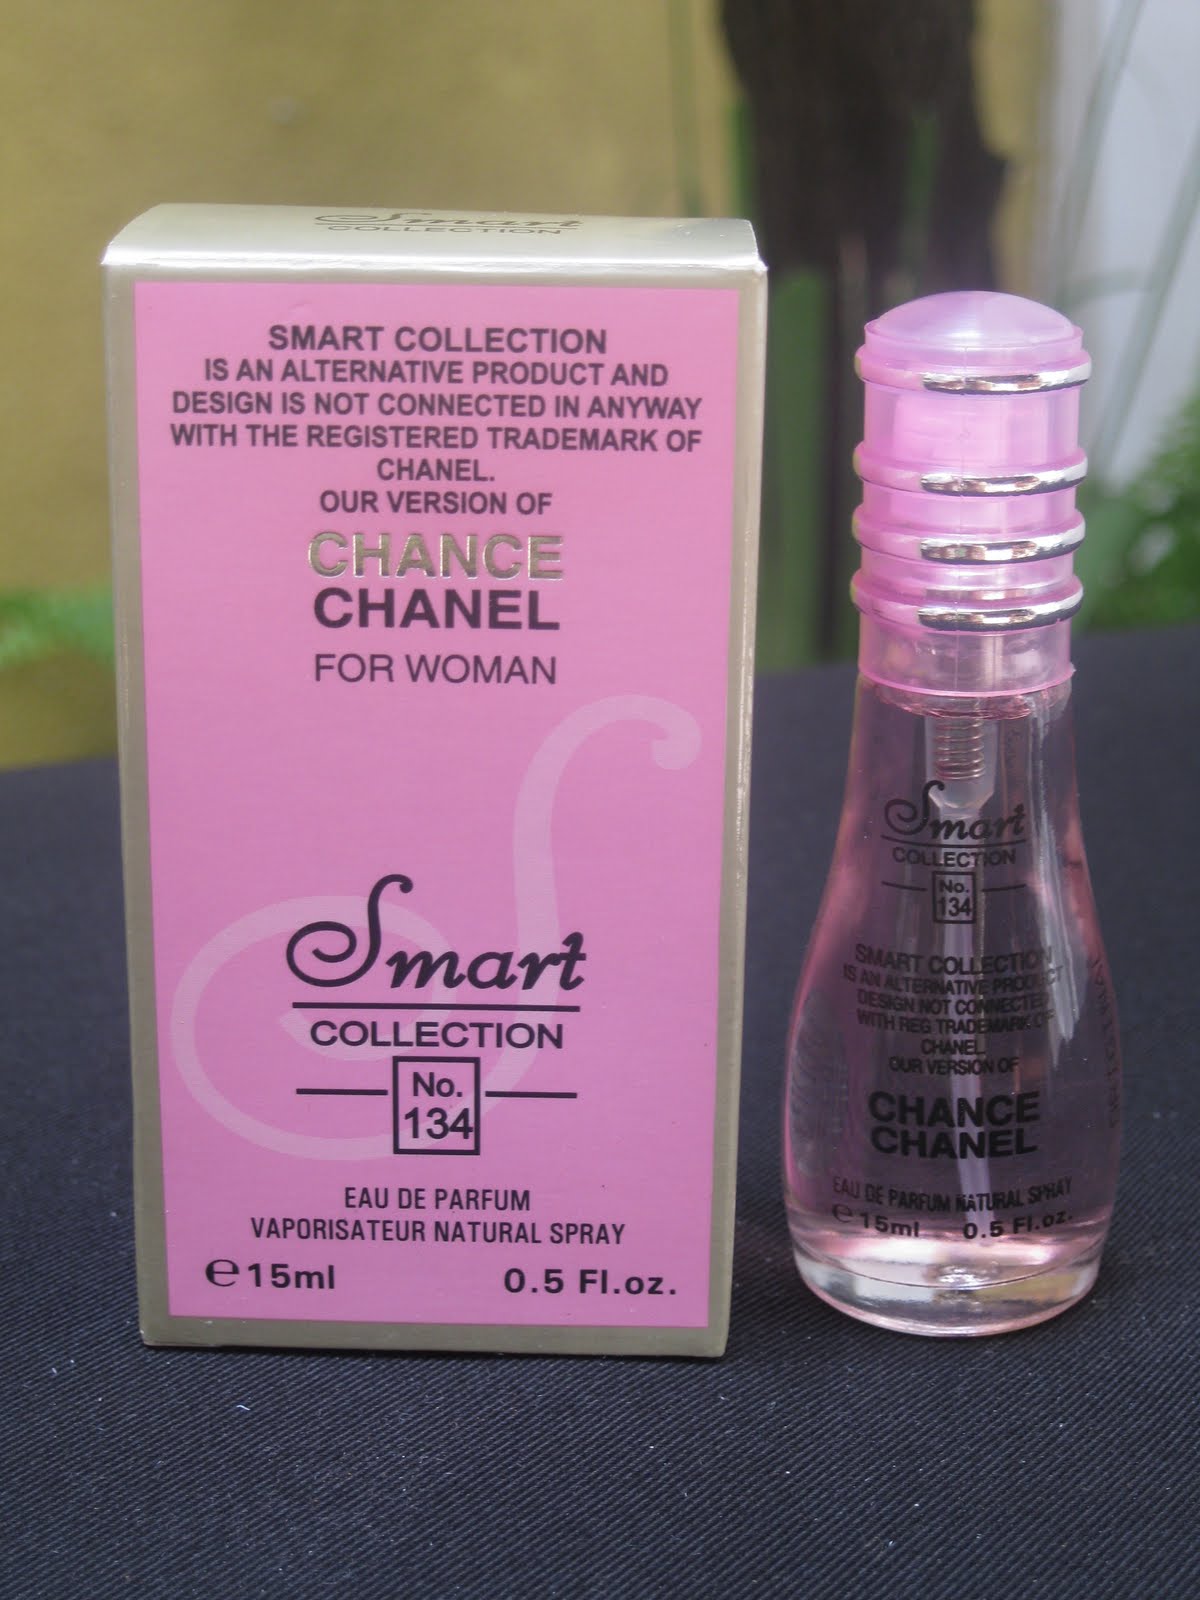 Smart collection. Парфюм смарт коллекшн. Смарт коллекшн духи женские. Smart collection Perfume 30ml 323. Smart collection духи 533.